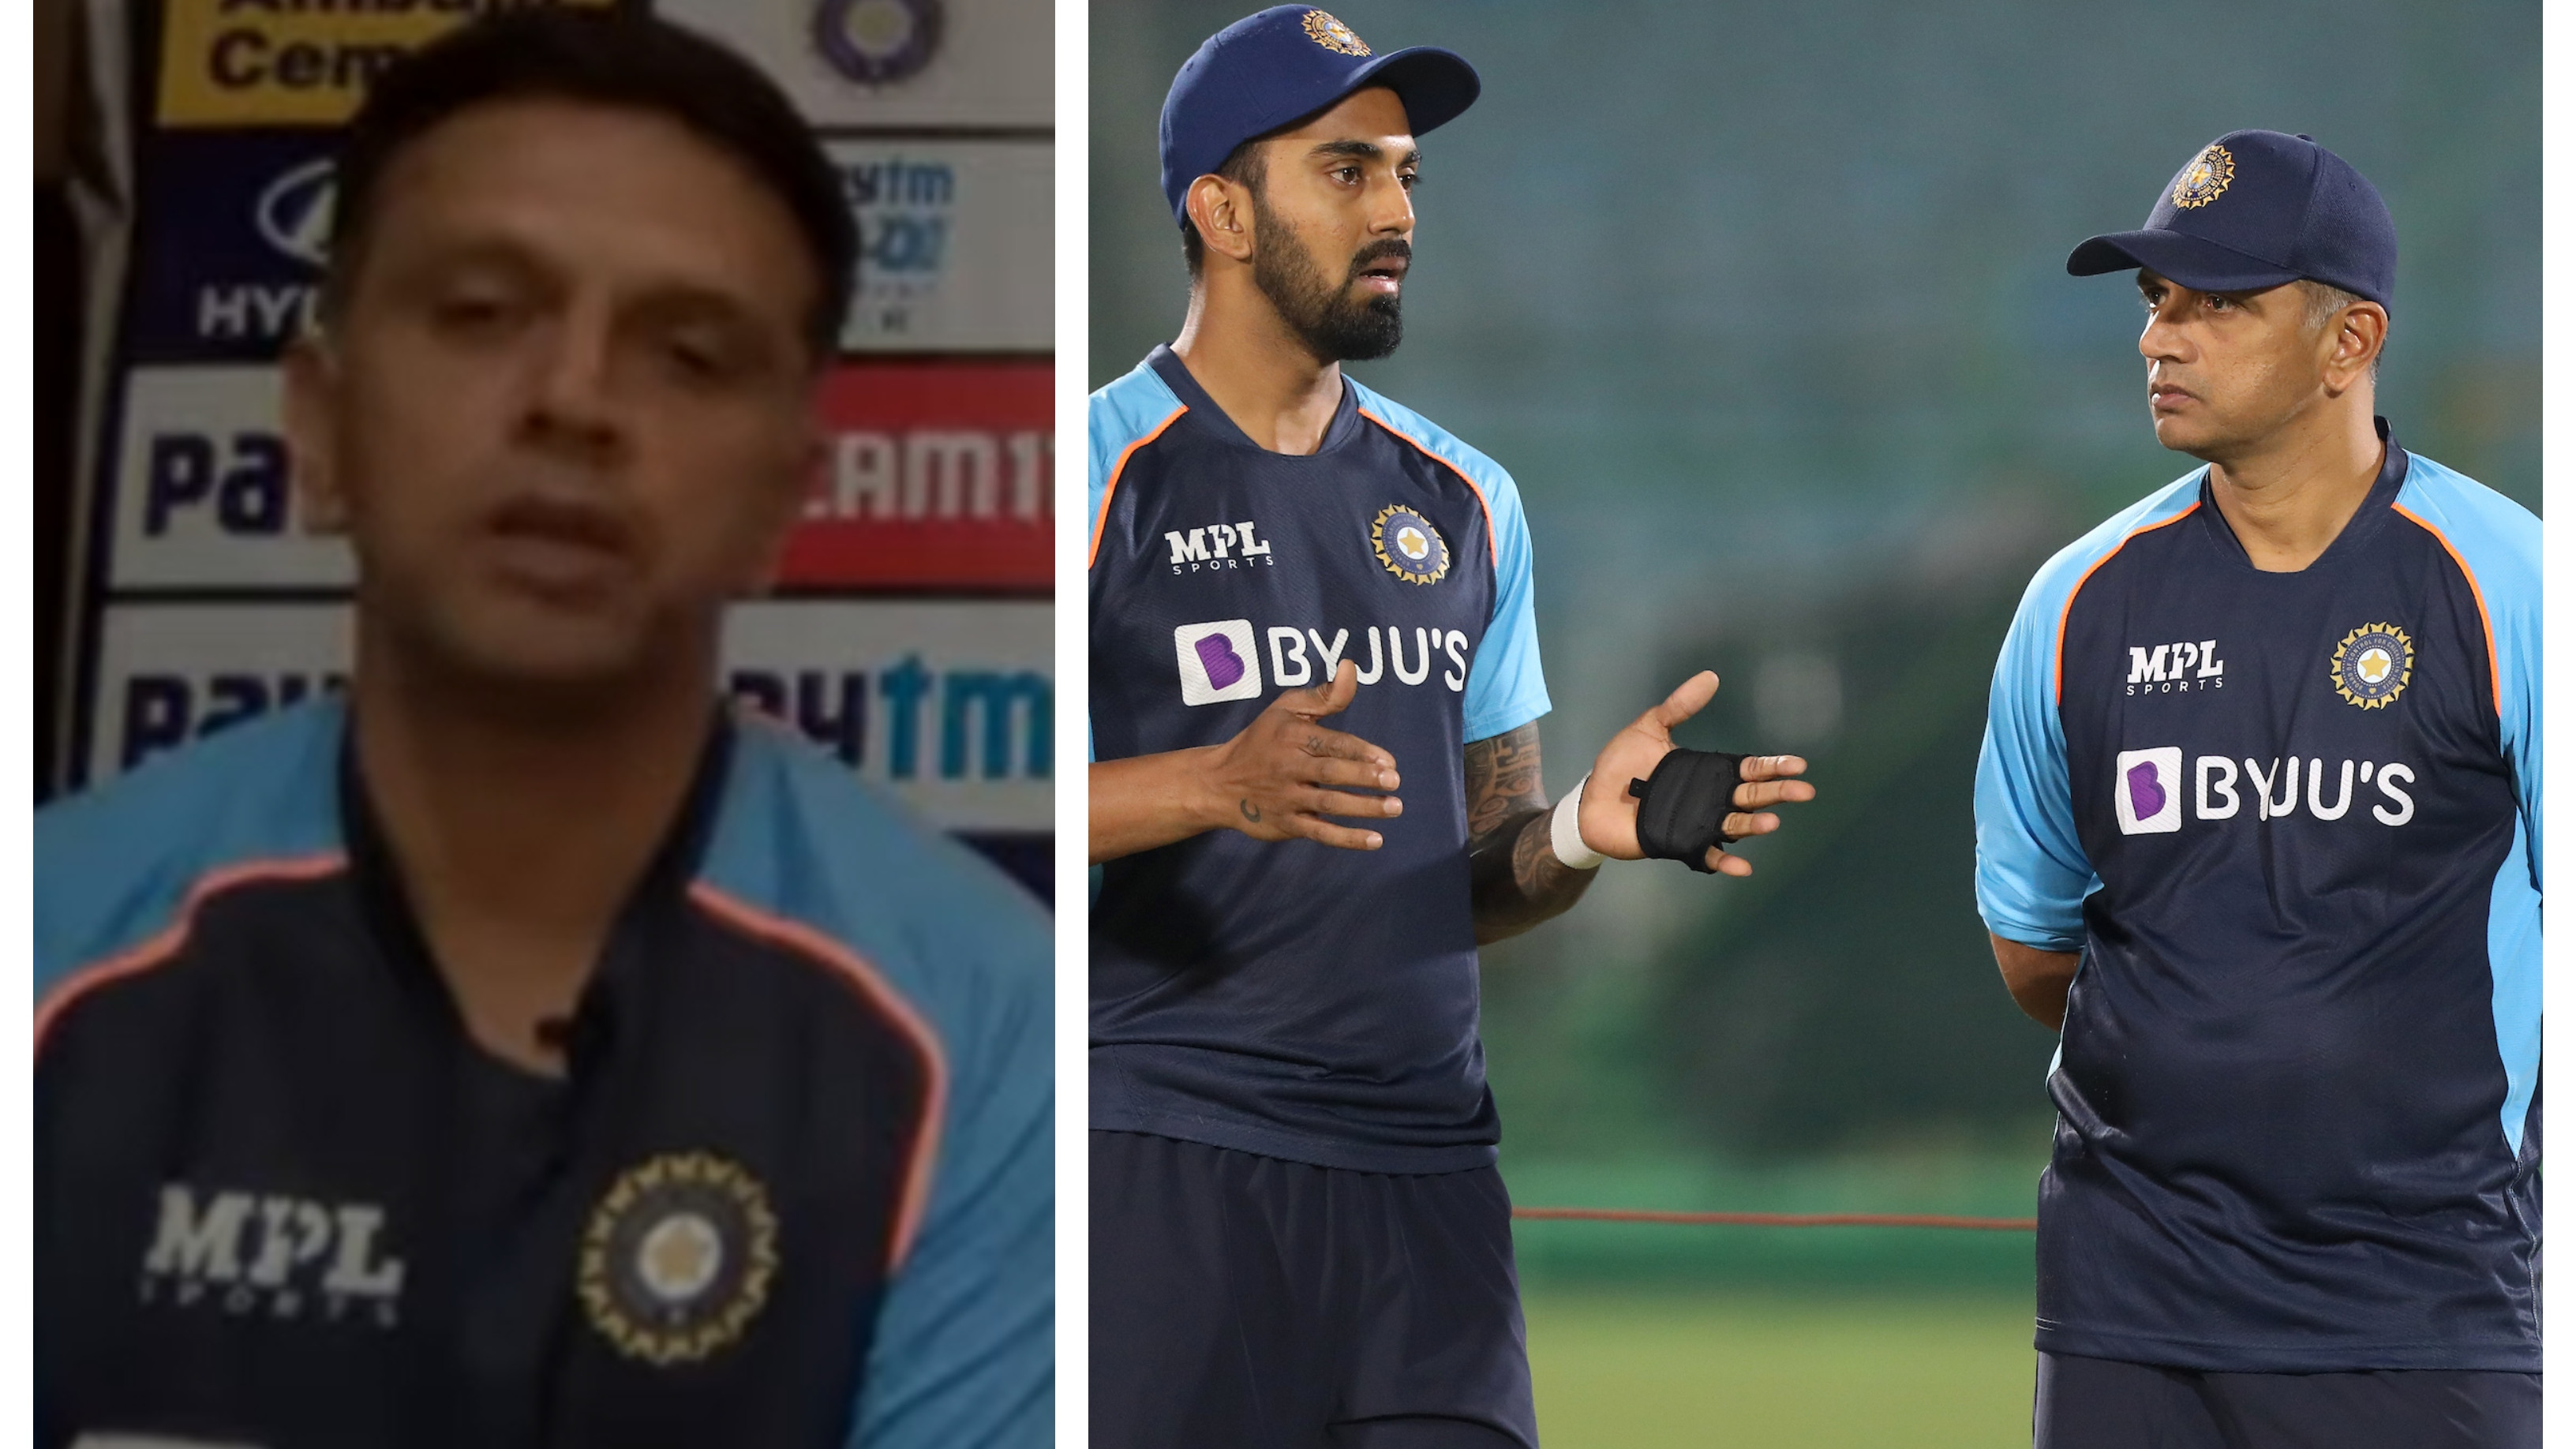 IND v NZ 2021: ‘There will be no letup on how we prepare and plan’, says India head coach Rahul Dravid